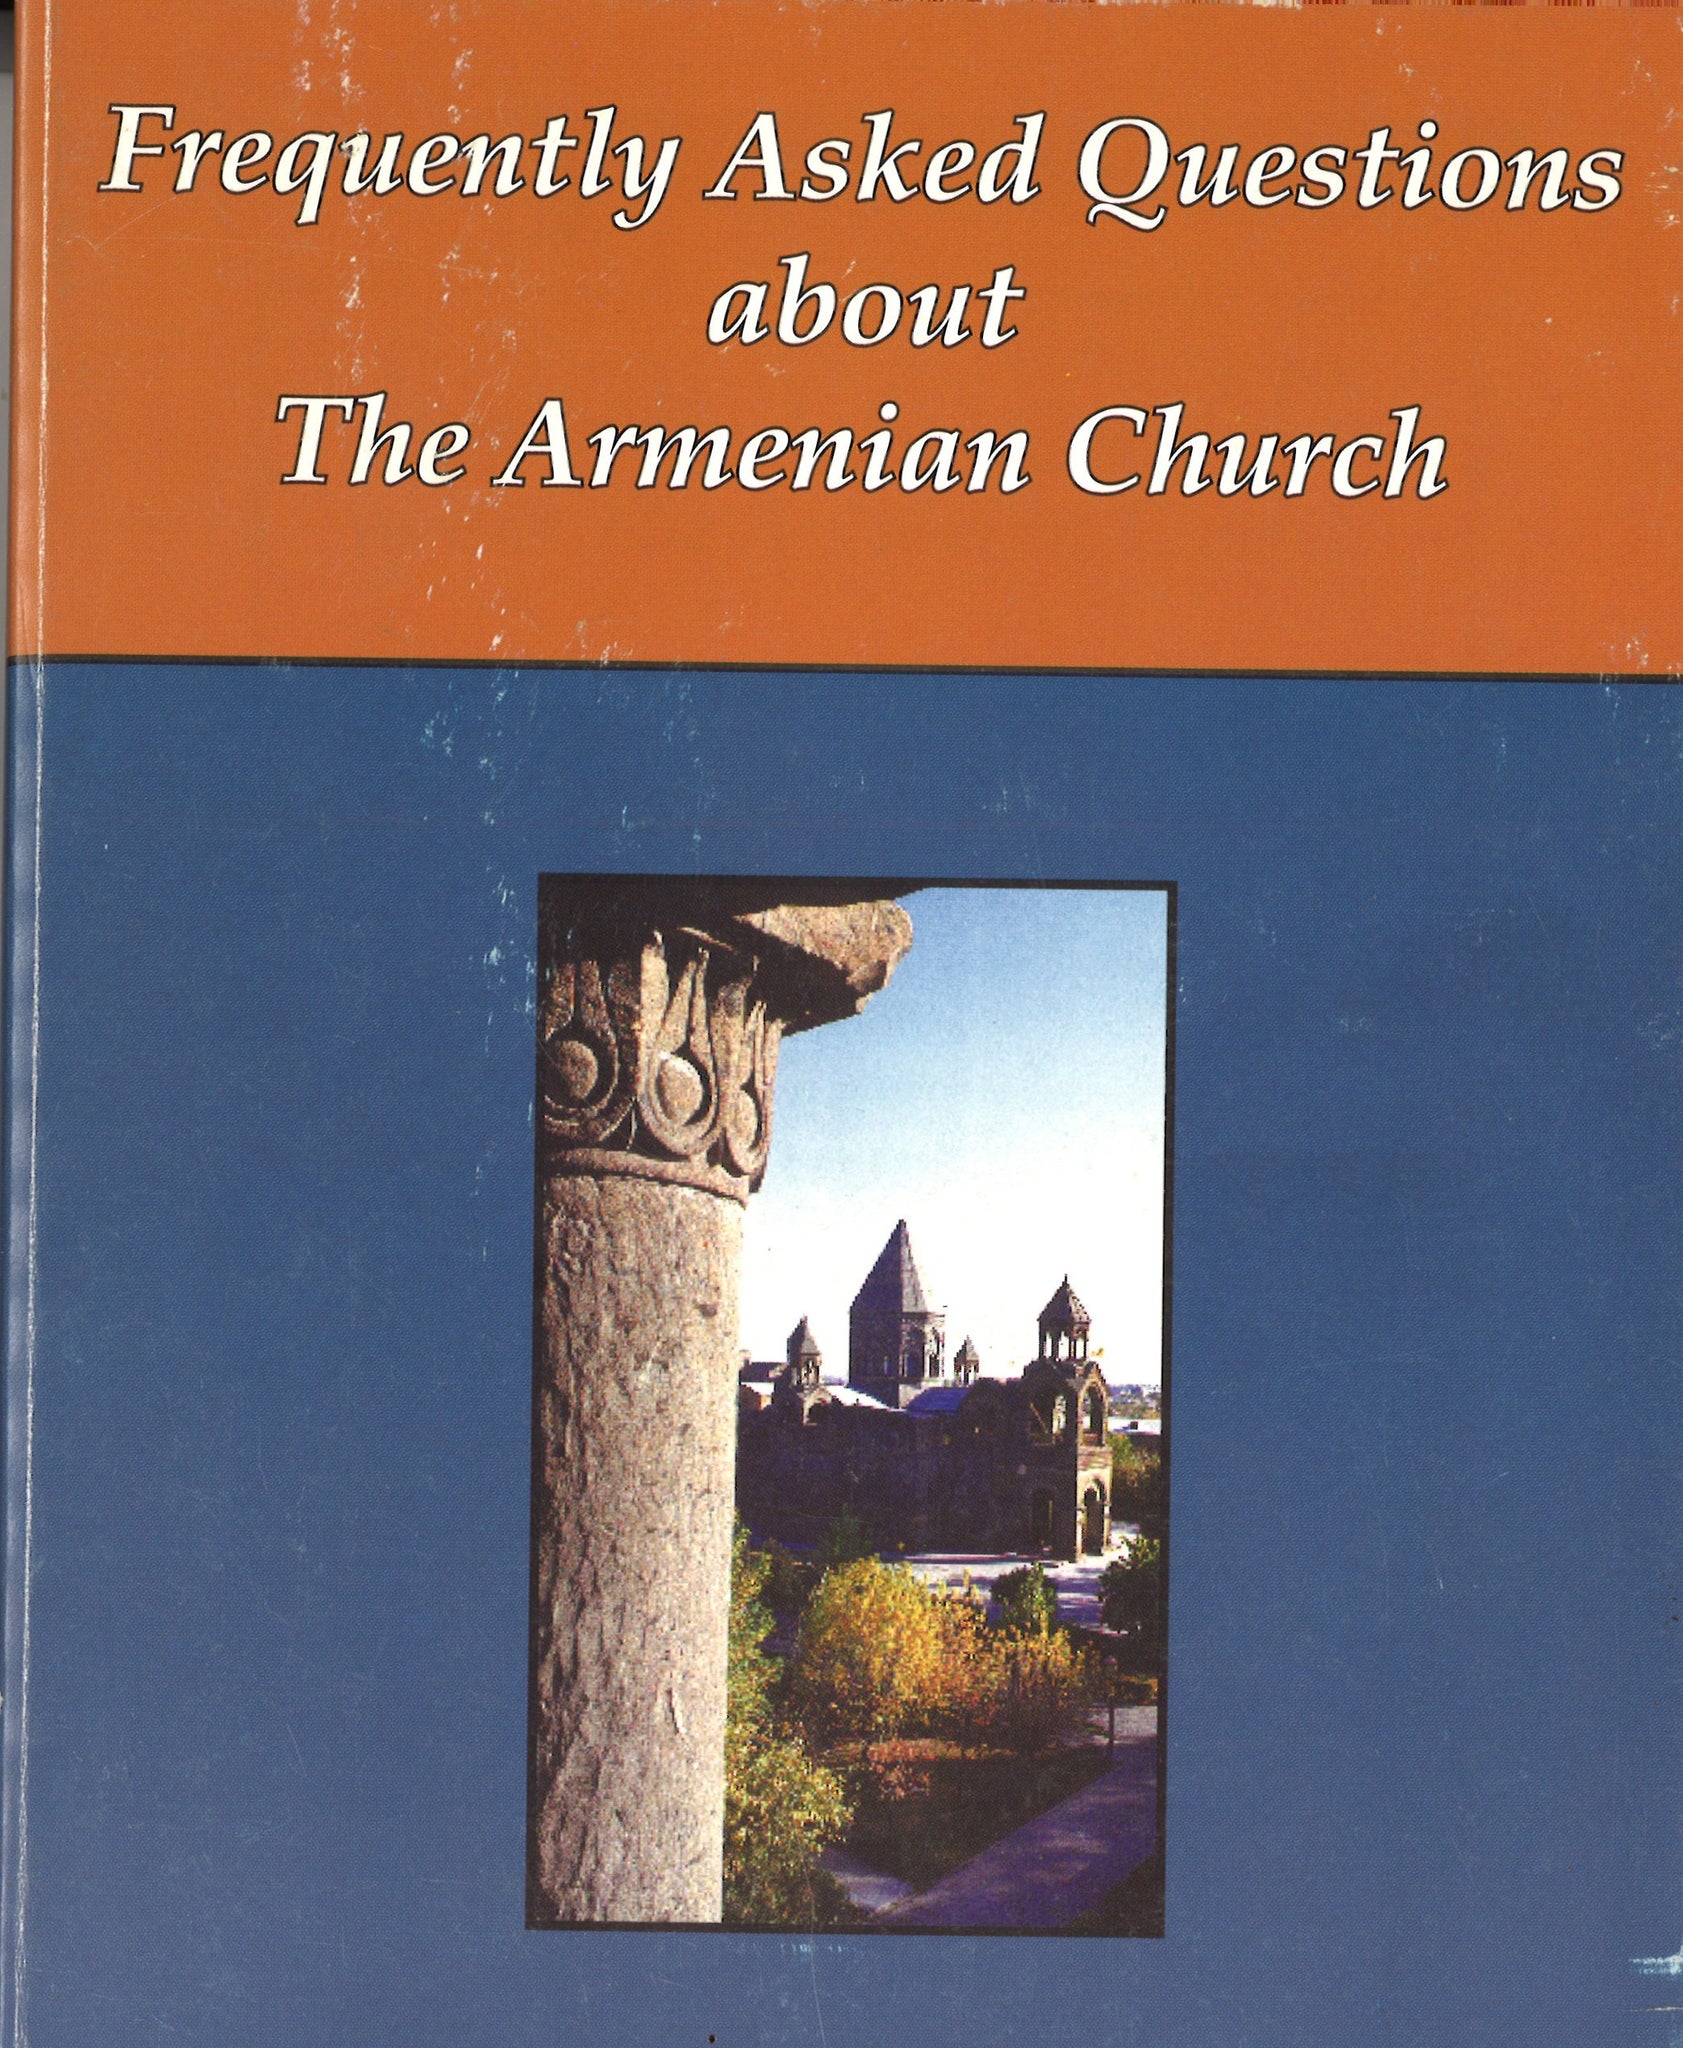 Frequently Asked Questions About the Armenian Church